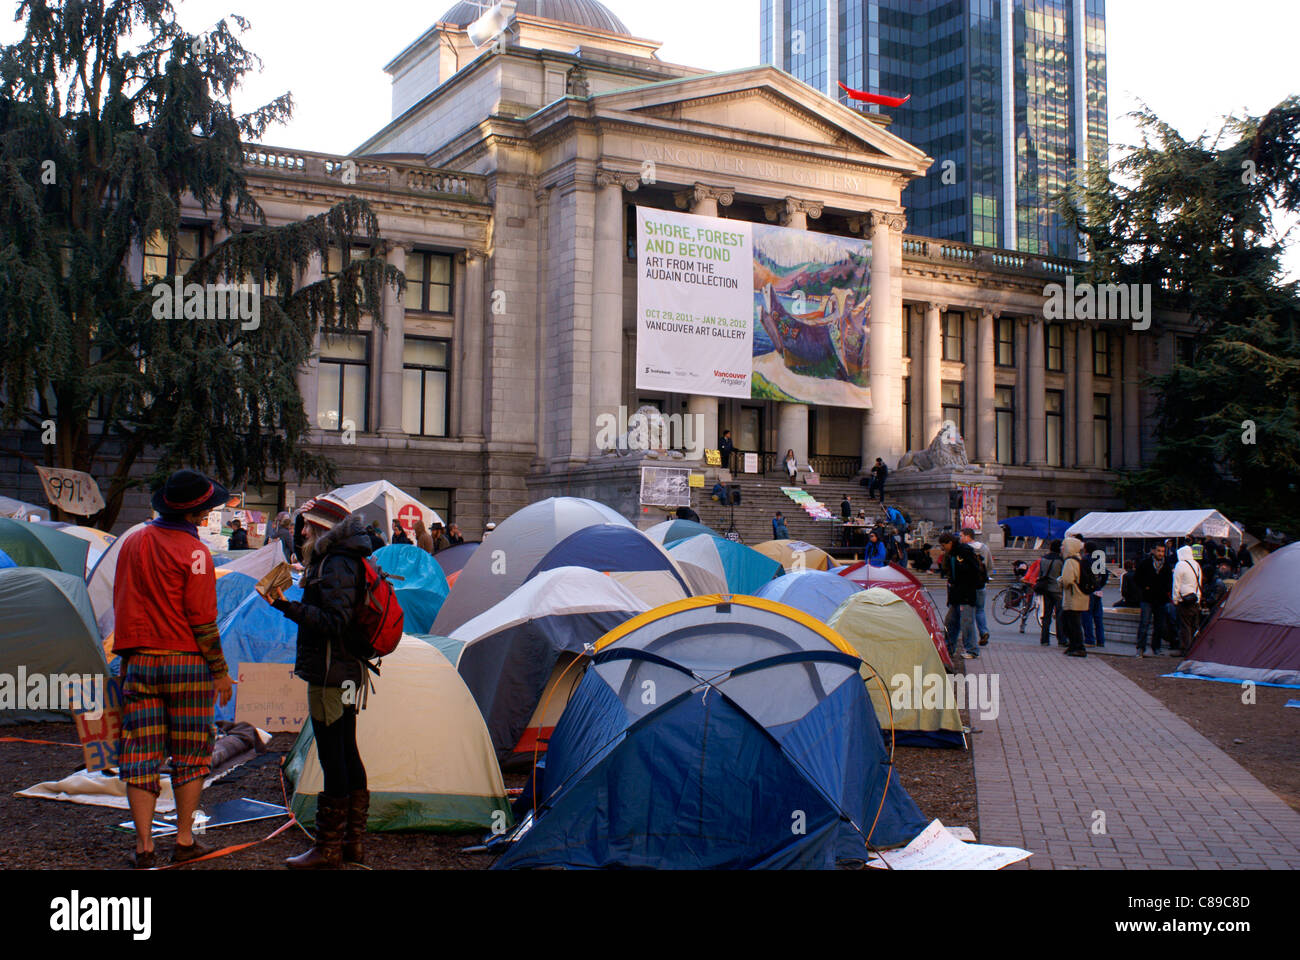 Protesters tents at the Occupy Vancouver rally in front of the Vancouver Art Gallery, Vancouver, British Columbia, Canada. Stock Photo